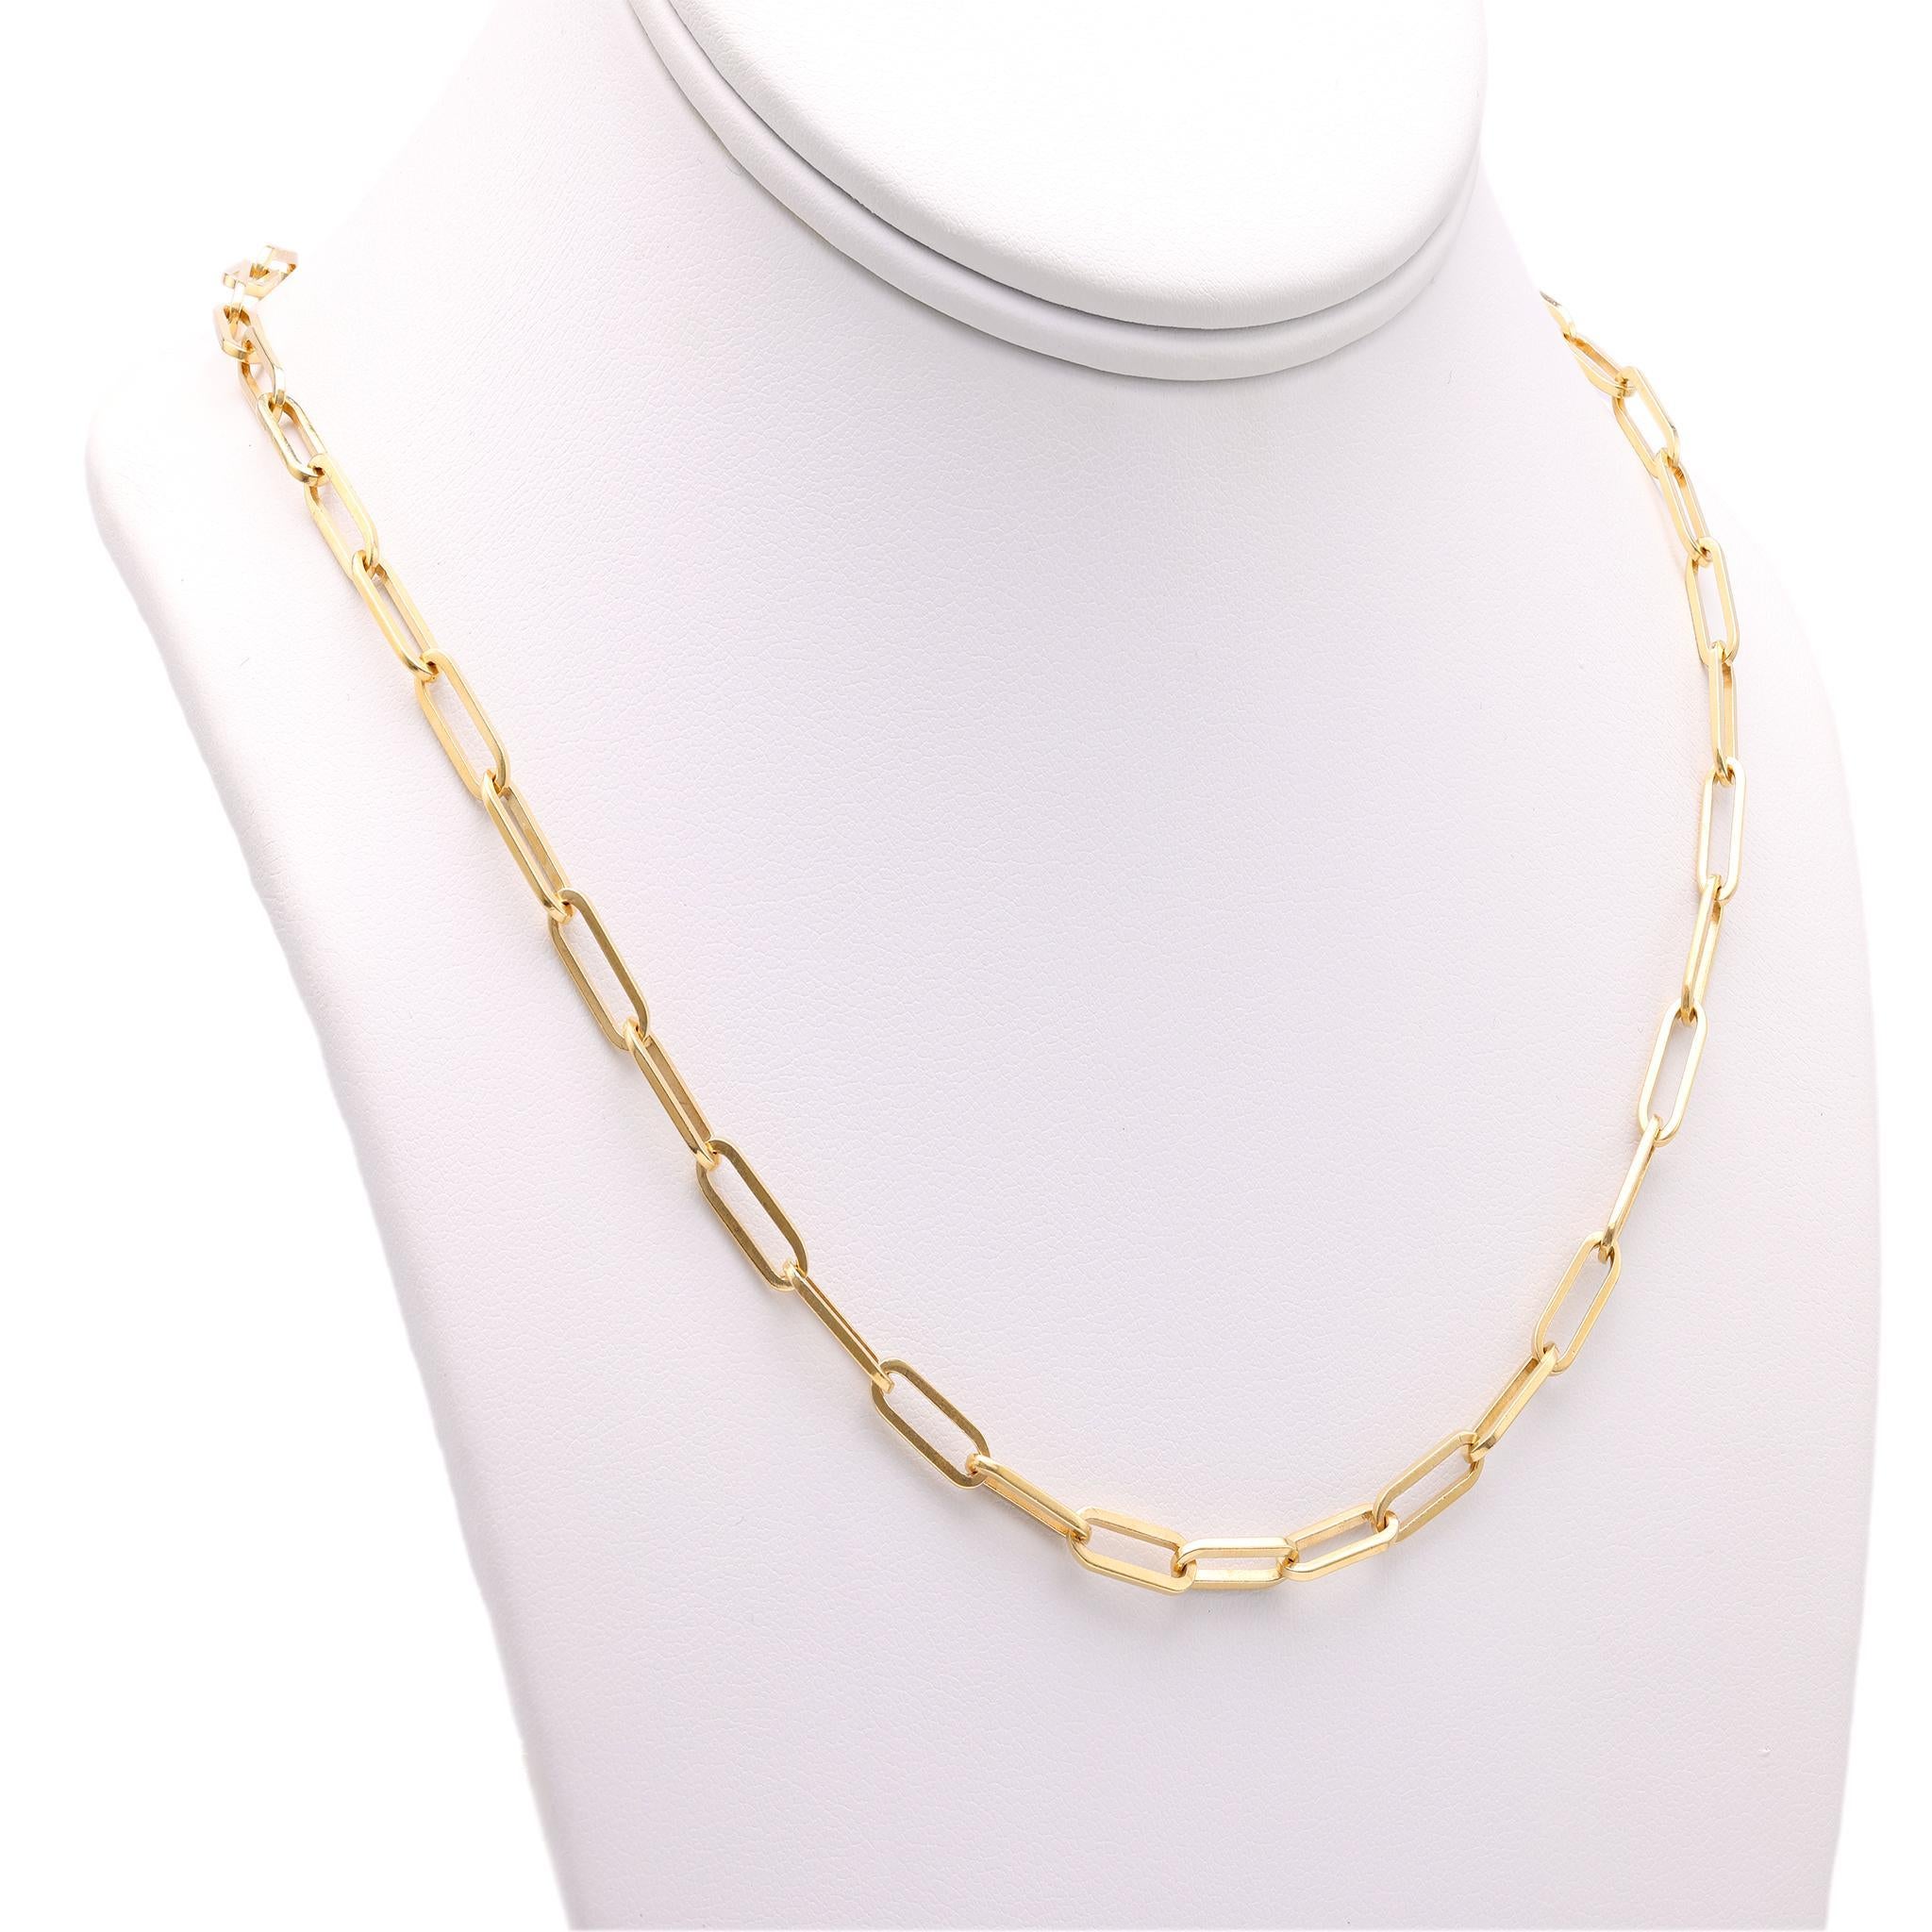 One Vintage French Dinh Van 18k Yellow Gold Paperclip Necklace. Crafted in 18 karat yellow gold signed Dinh Van with French hallmarks, weighing 24.40 grams. Circa 1970. The necklace is 26 inches in length.

About this Item: Step into the world of